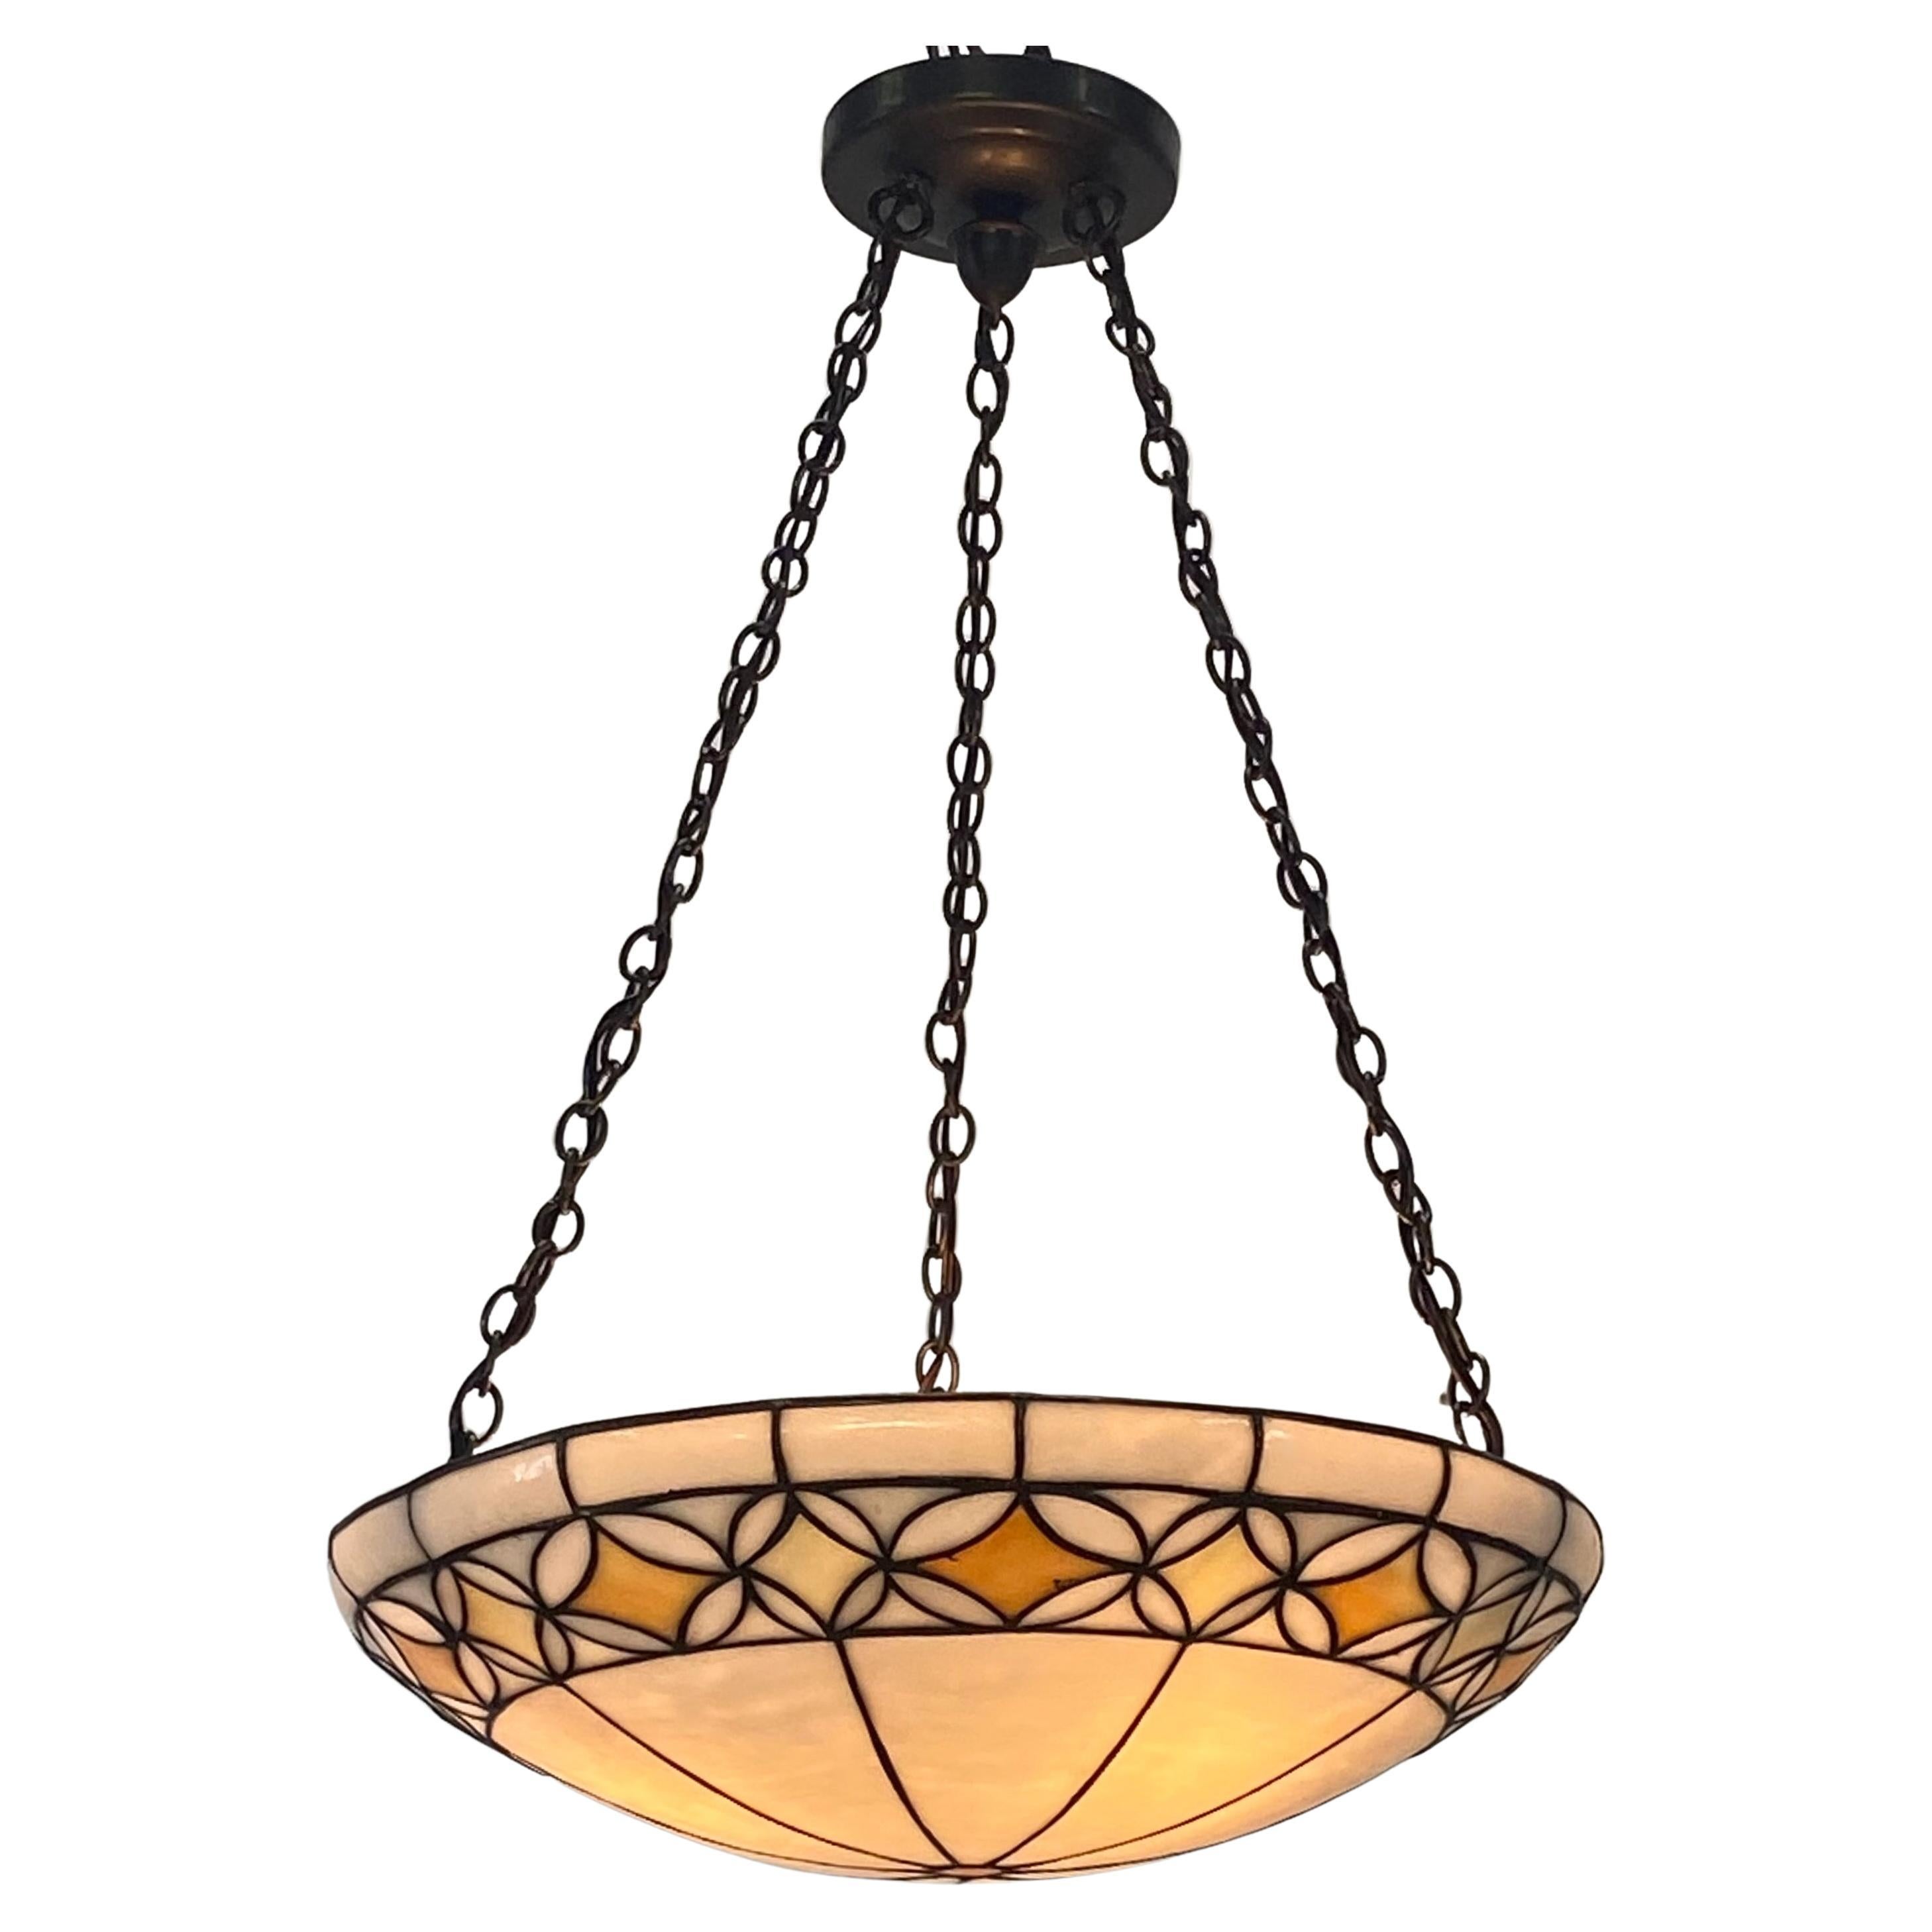 Antique Leaded Glass Pendant Light Fixture, American Early 20th Century